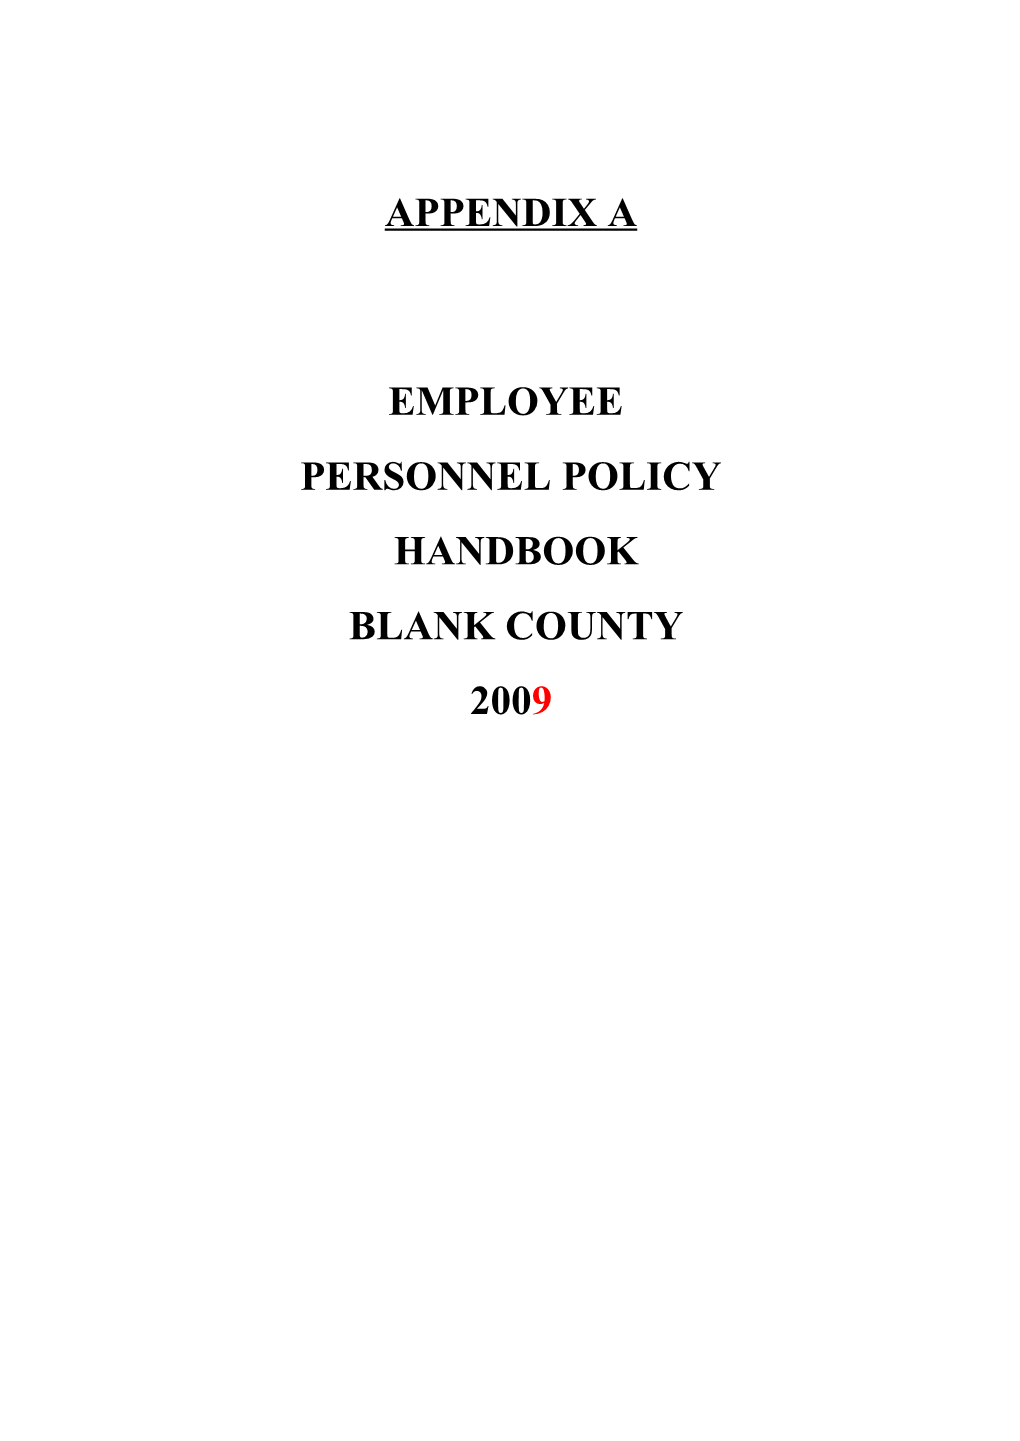 Personnel Policy